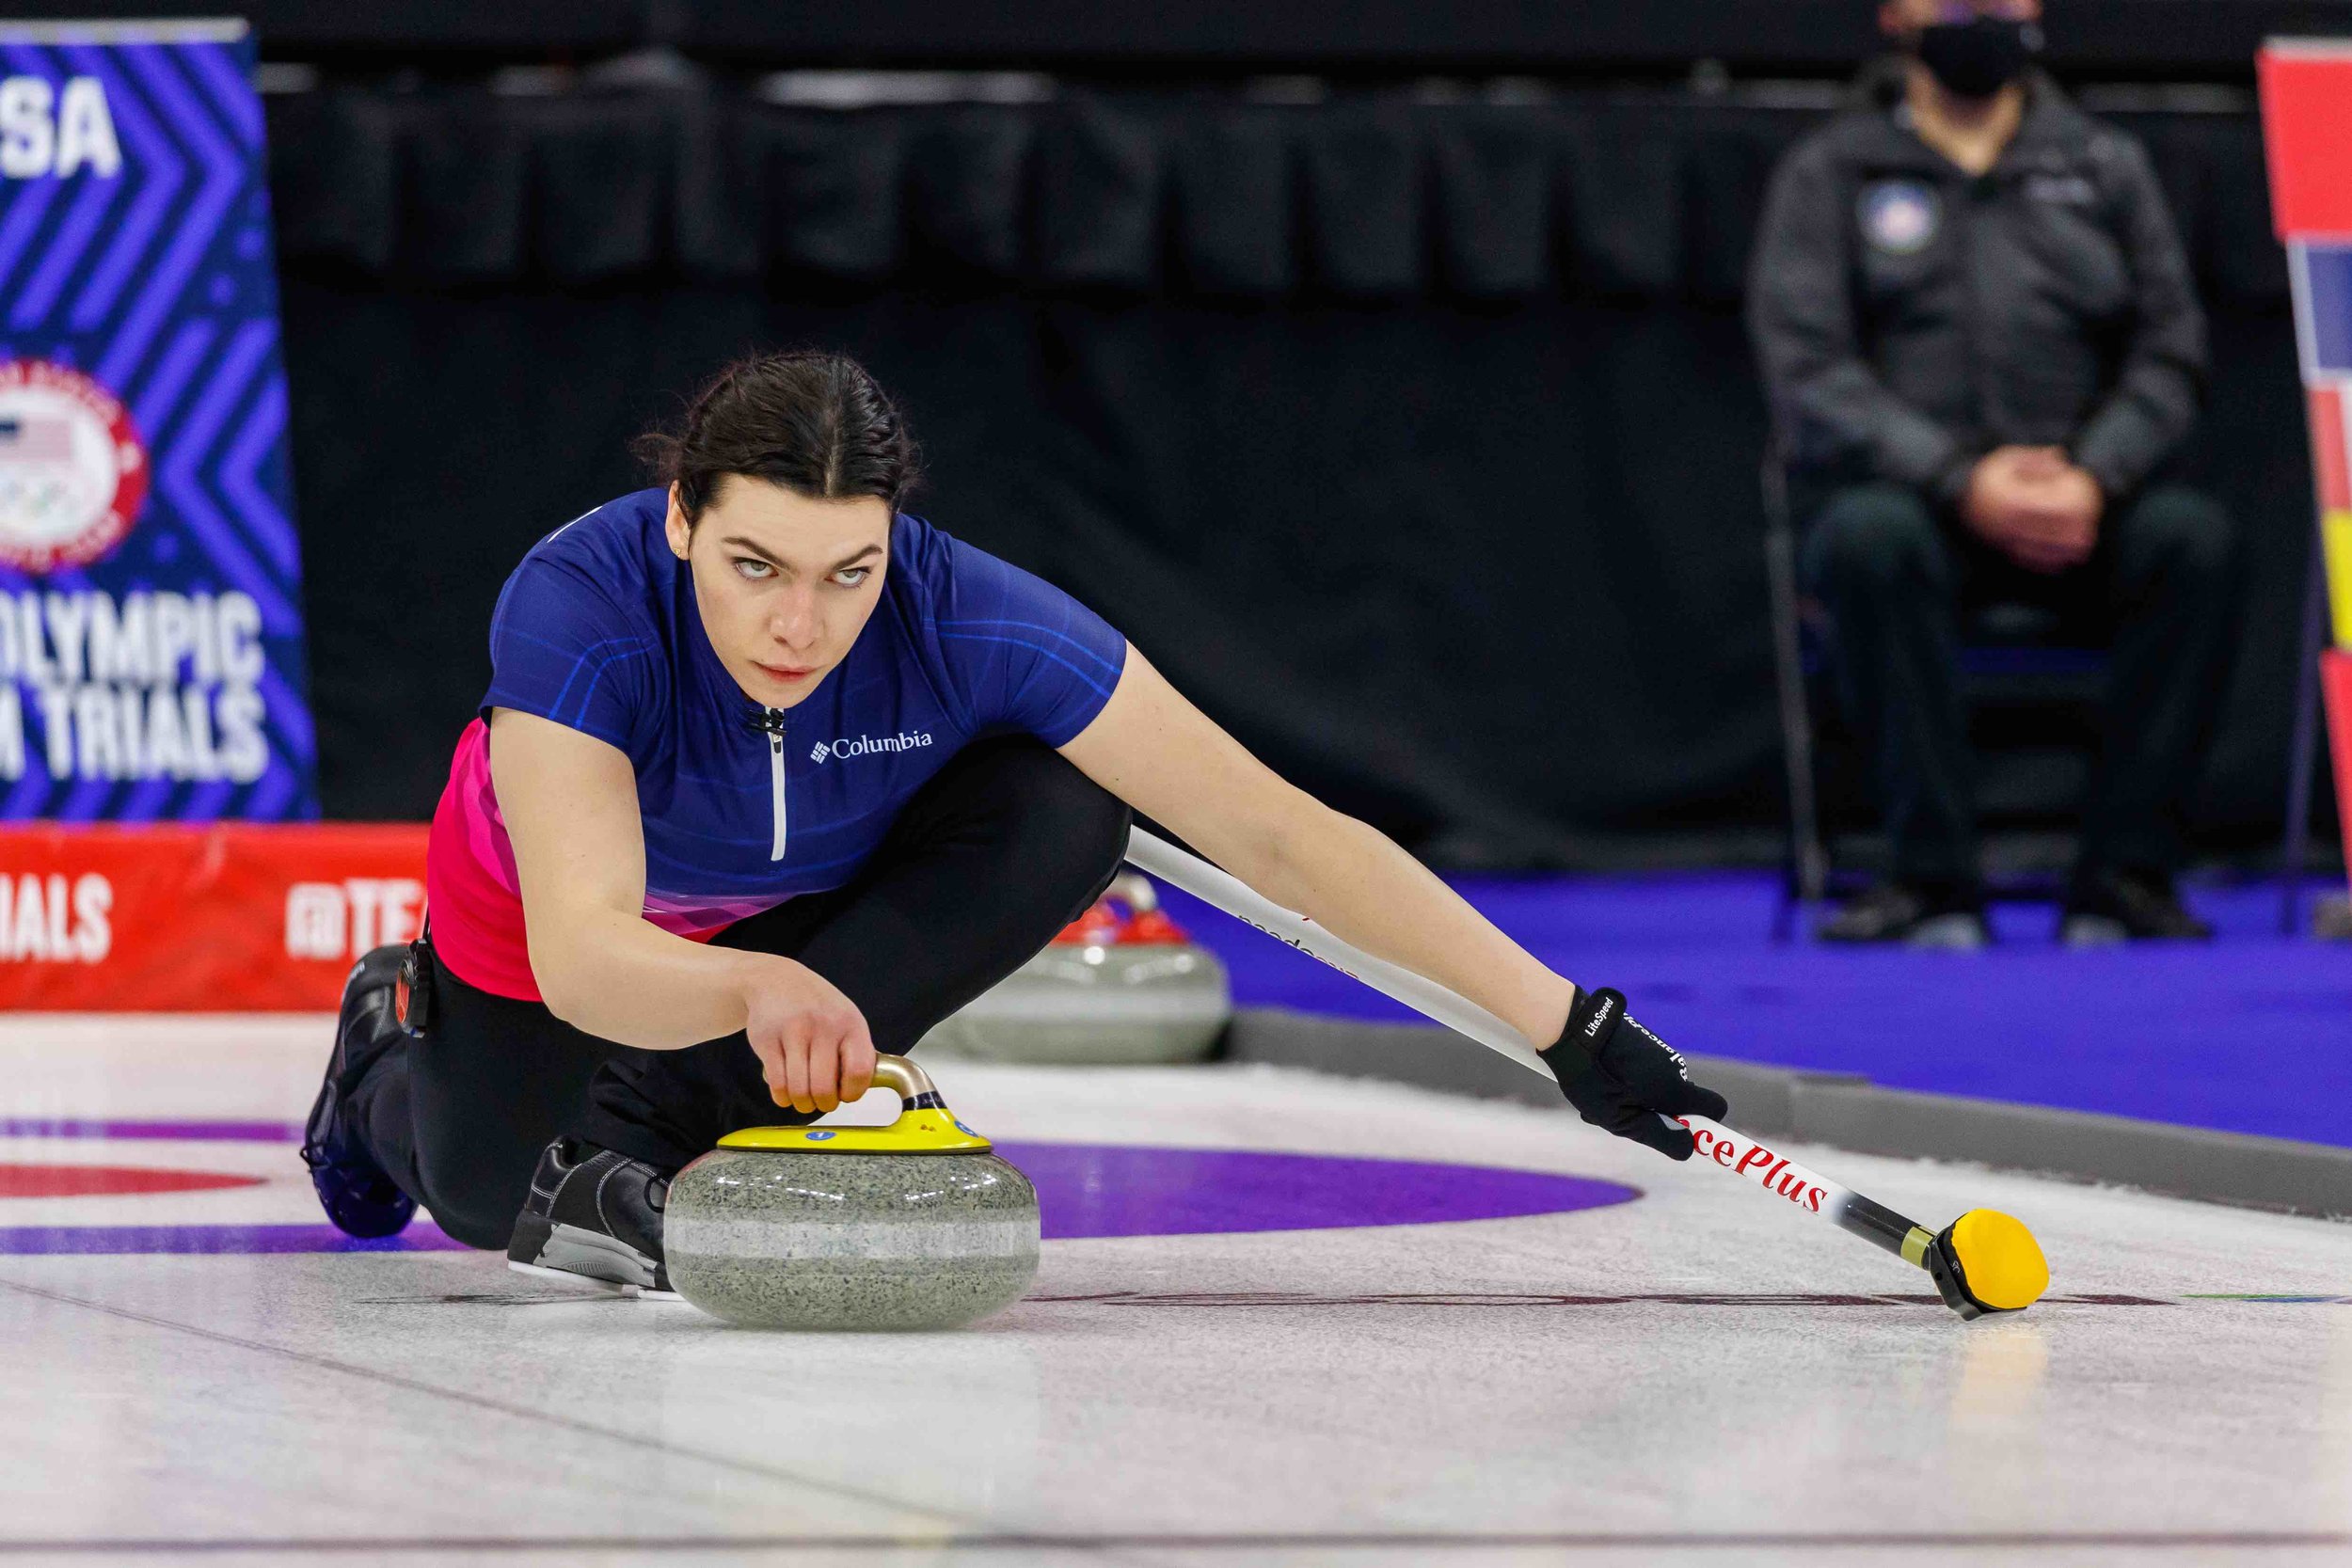 USA CURLING PARTNERS WITH CURLING STADIUM TO PROVIDE WEBSTREAMING OF FIVE NATIONAL CHAMPIONSHIPS — USA CURLING